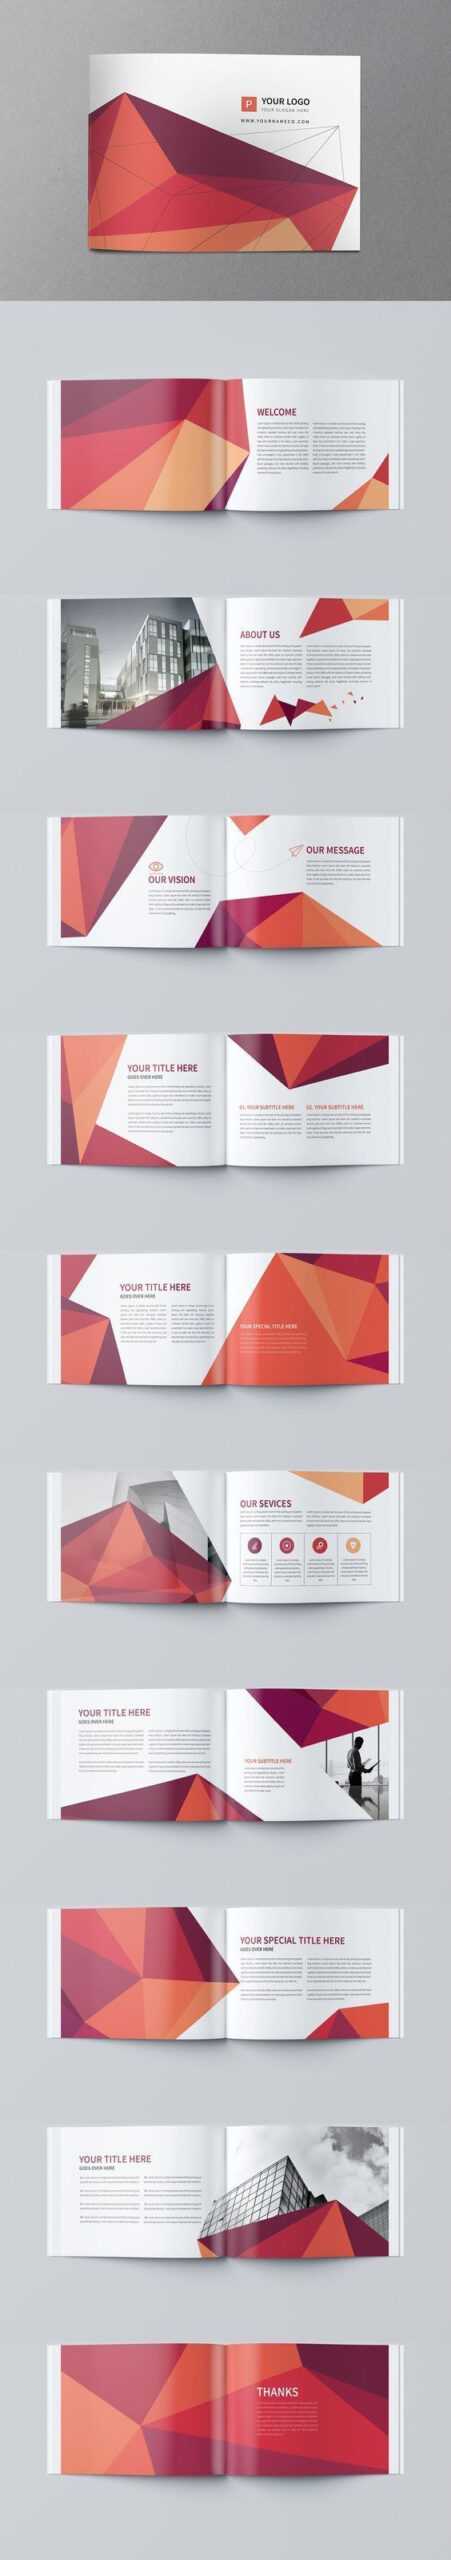 2534 Architecture Brochure Template – 43+ Free Psd, Pdf, Eps Pertaining To Architecture Brochure Templates Free Download